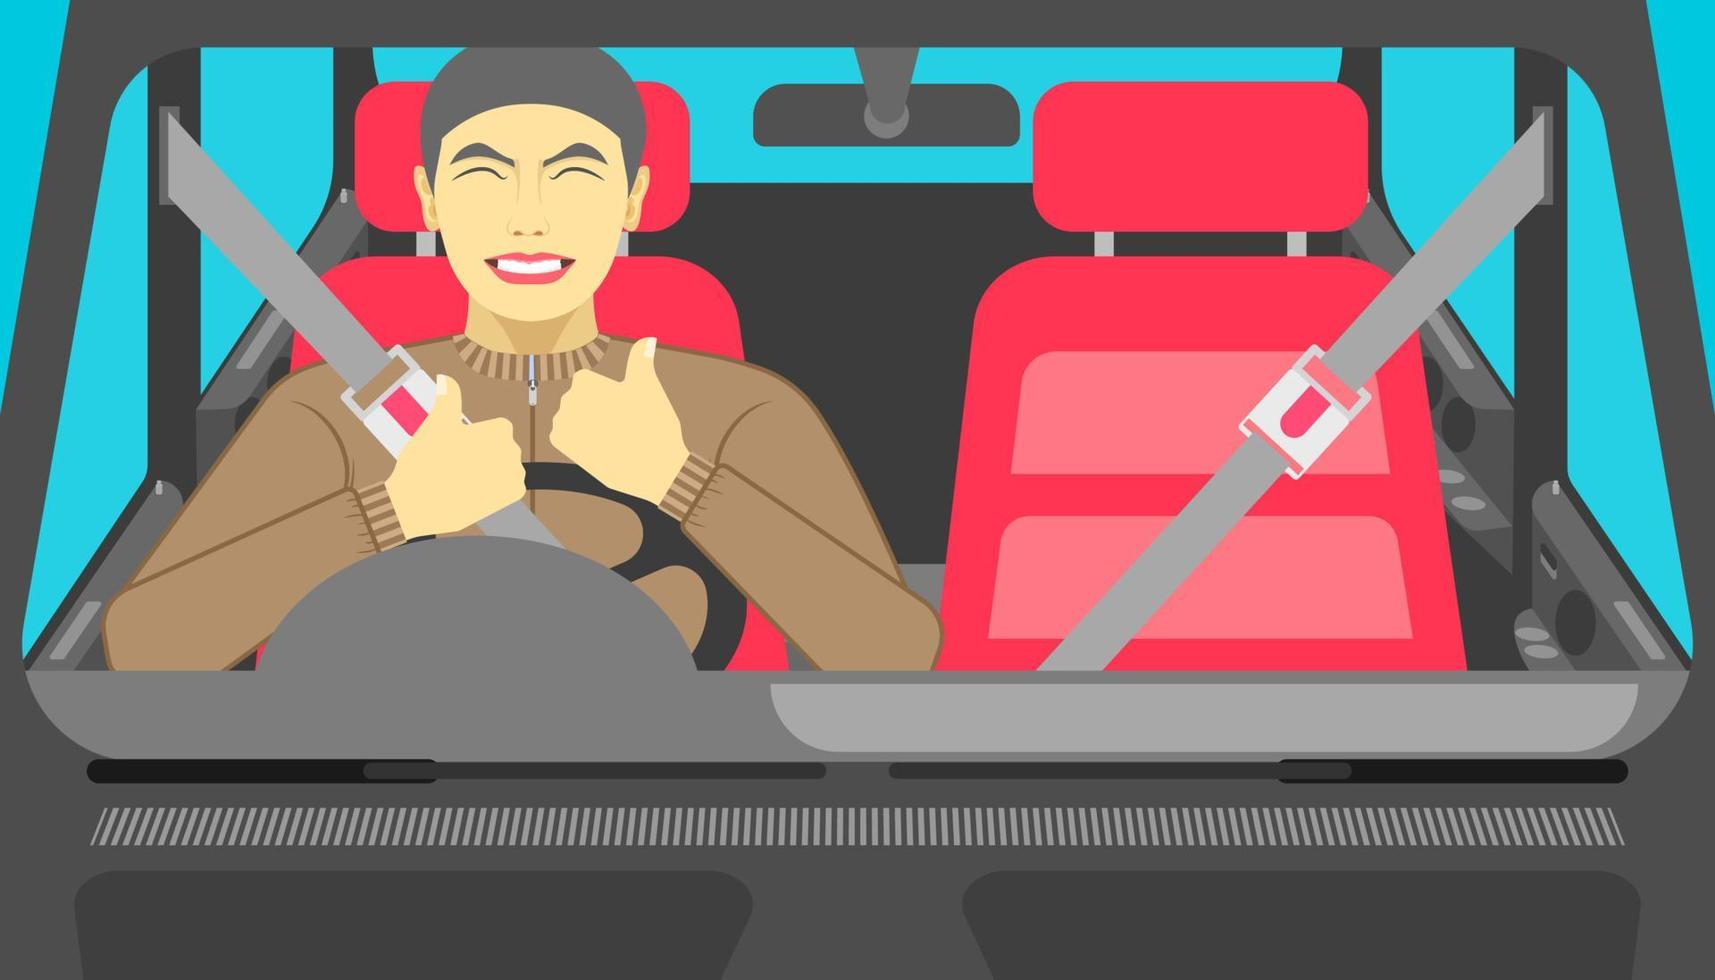 safe drive car. a man so happy when he put the safety belt before go on the road. vector illustration eps10